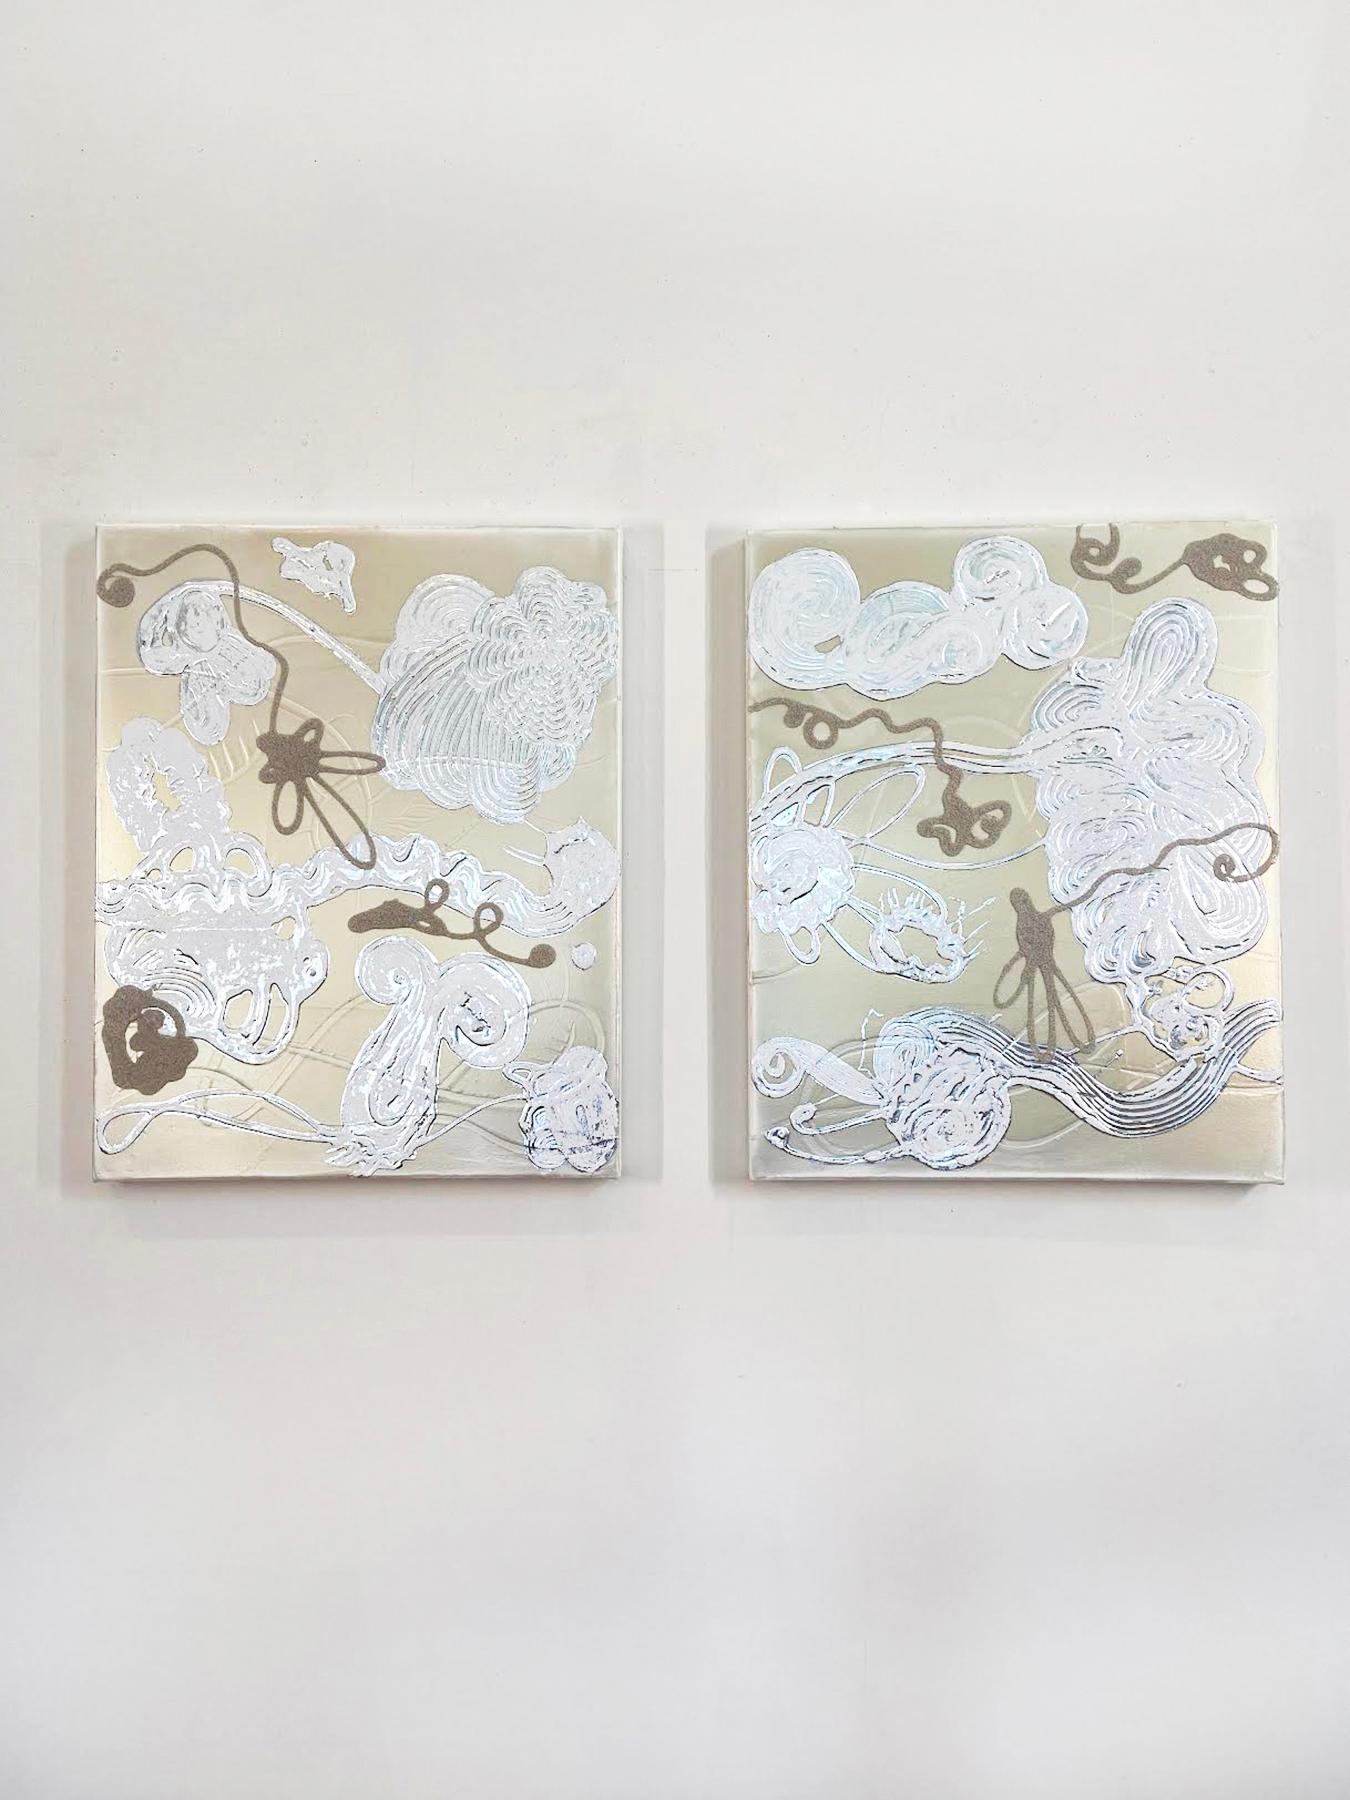 Available at Madelyn Jordon Fine Art. 'Blue/Gold/Silver Mica Painting (Flower Float no. 2)' 2024 by Catherine Howe. Interference pigments, acrylic, glass micro beads, aluminum leaf, and white leaf on canvas, 30 x 24 in. This painting features Howe's